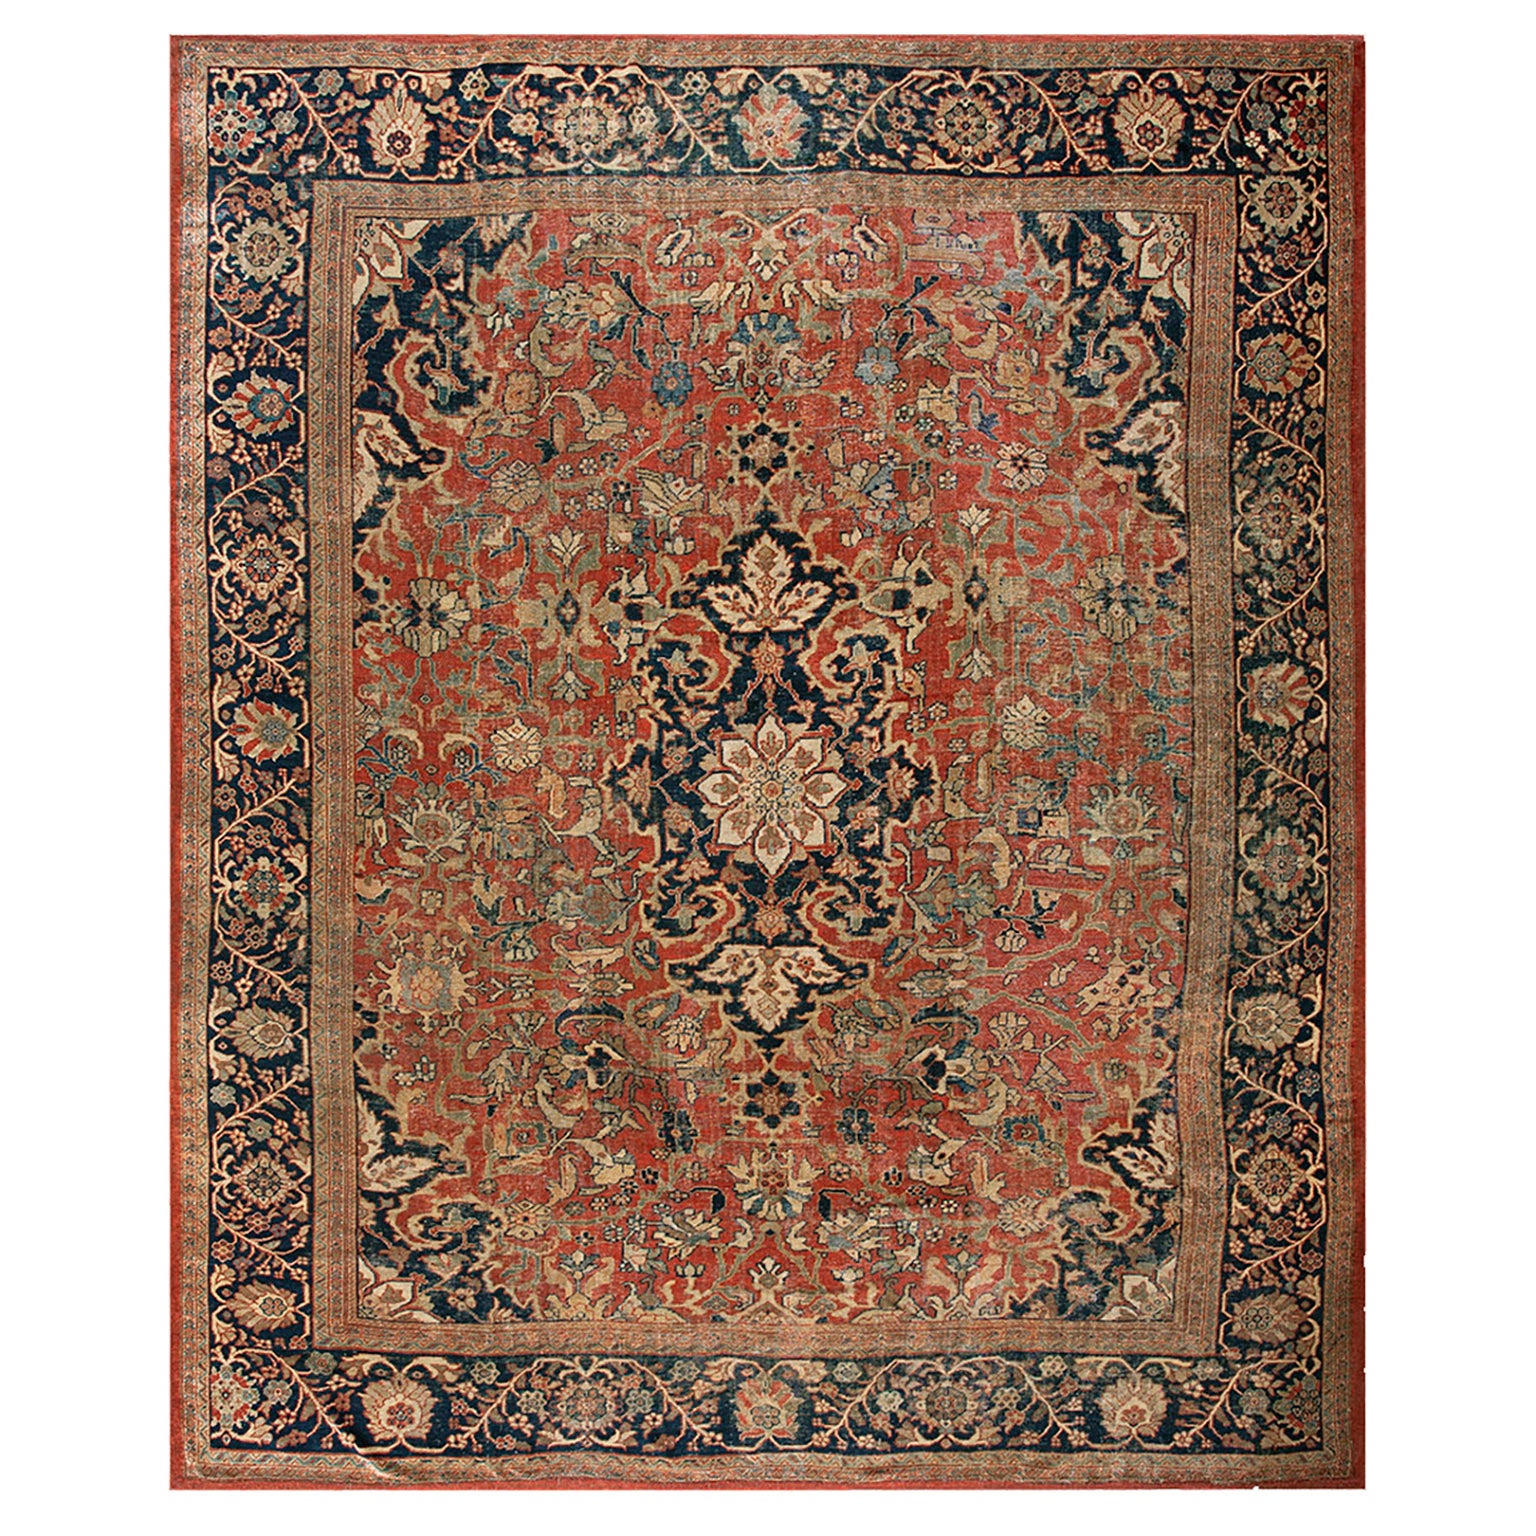 Late 19th Century Persian Sultanabad Carpet ( 10'9" x 13'8" - 328 x 417 )